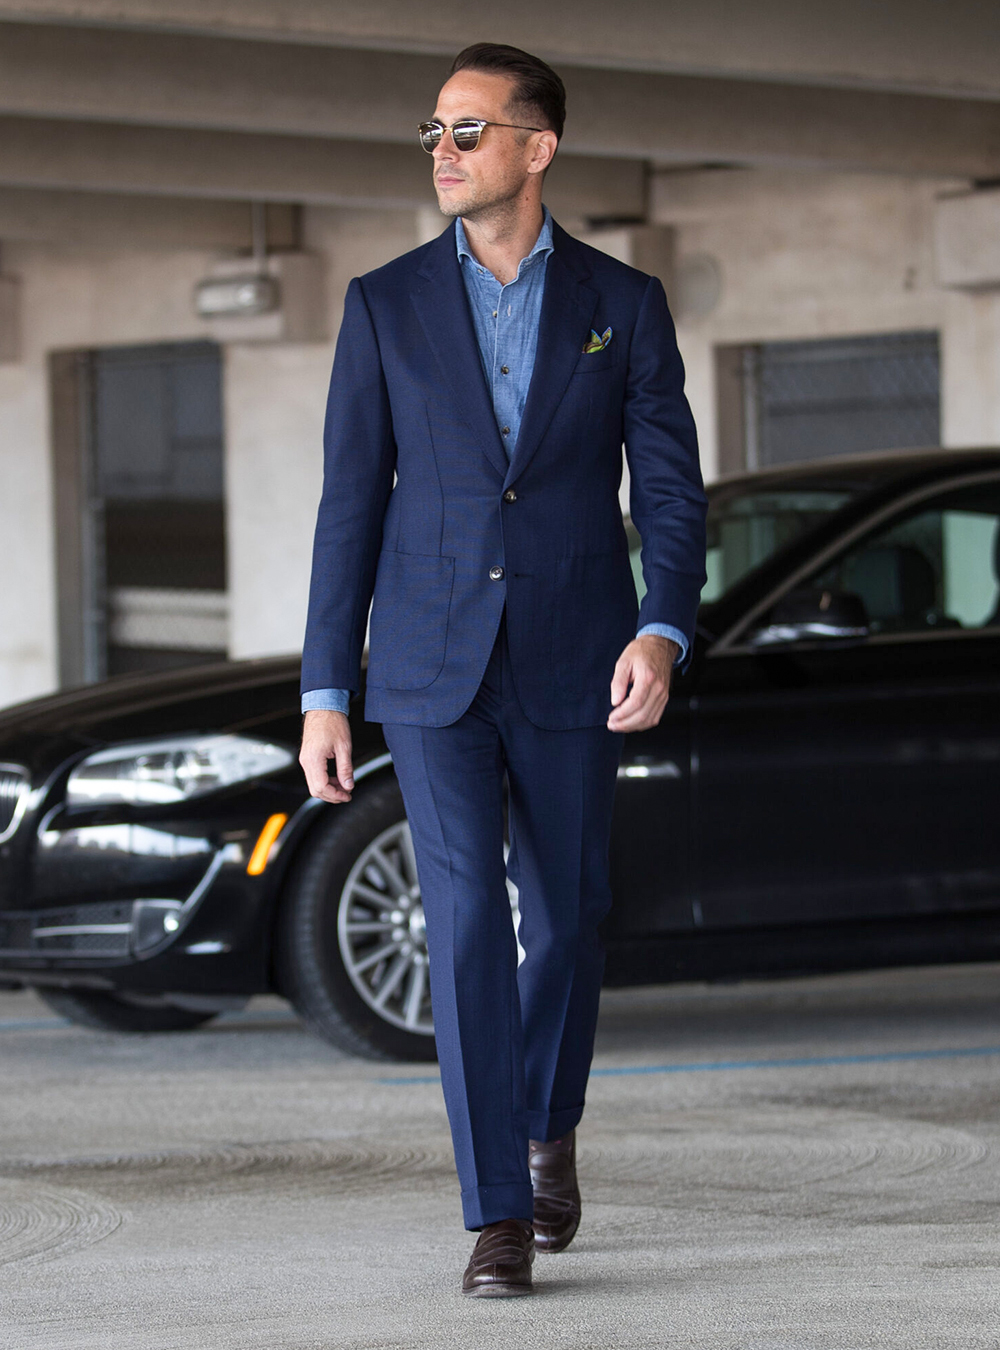 Navy blue hopsack suit, denim shirt and brown loafers